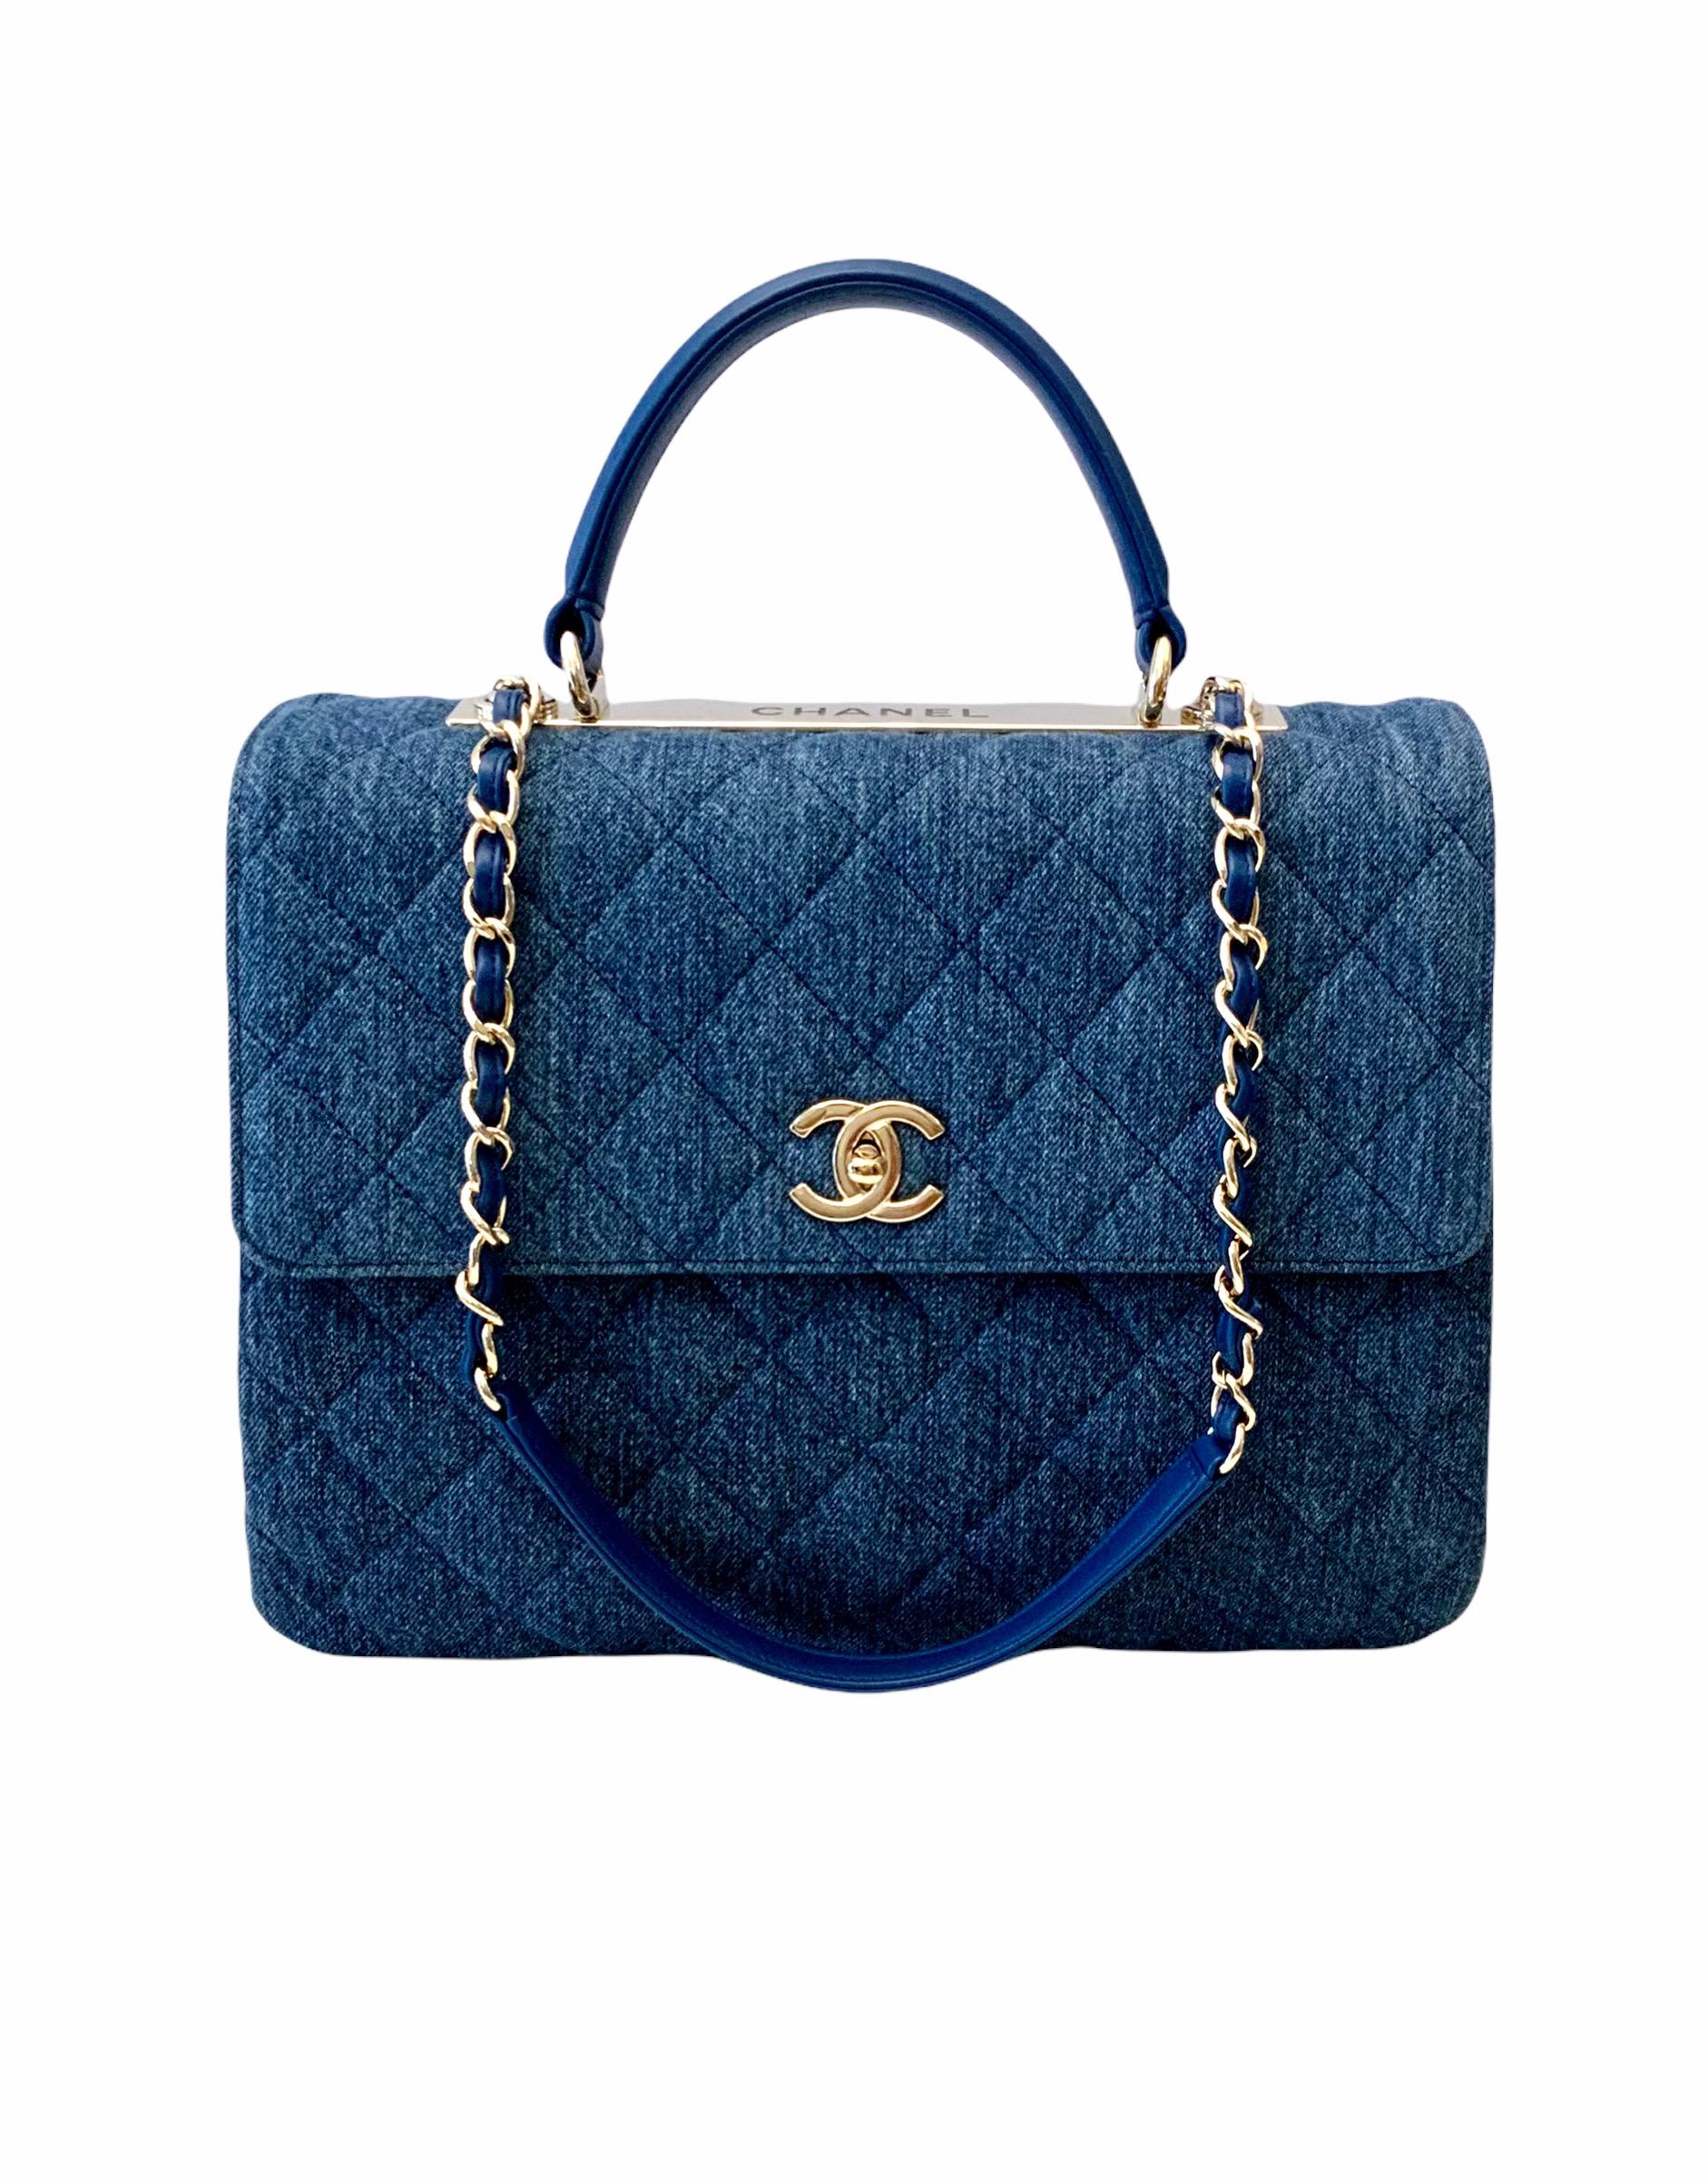 Aboslutely stunning pre-owned Trendy CC Top Handle Bag from the house of Chanel. Part of the Métiers d'Art Collection 2017, this is a very rare piece.
Crafted from blue quilted denim, It is the most classic version of the Trendy CC Collection: a